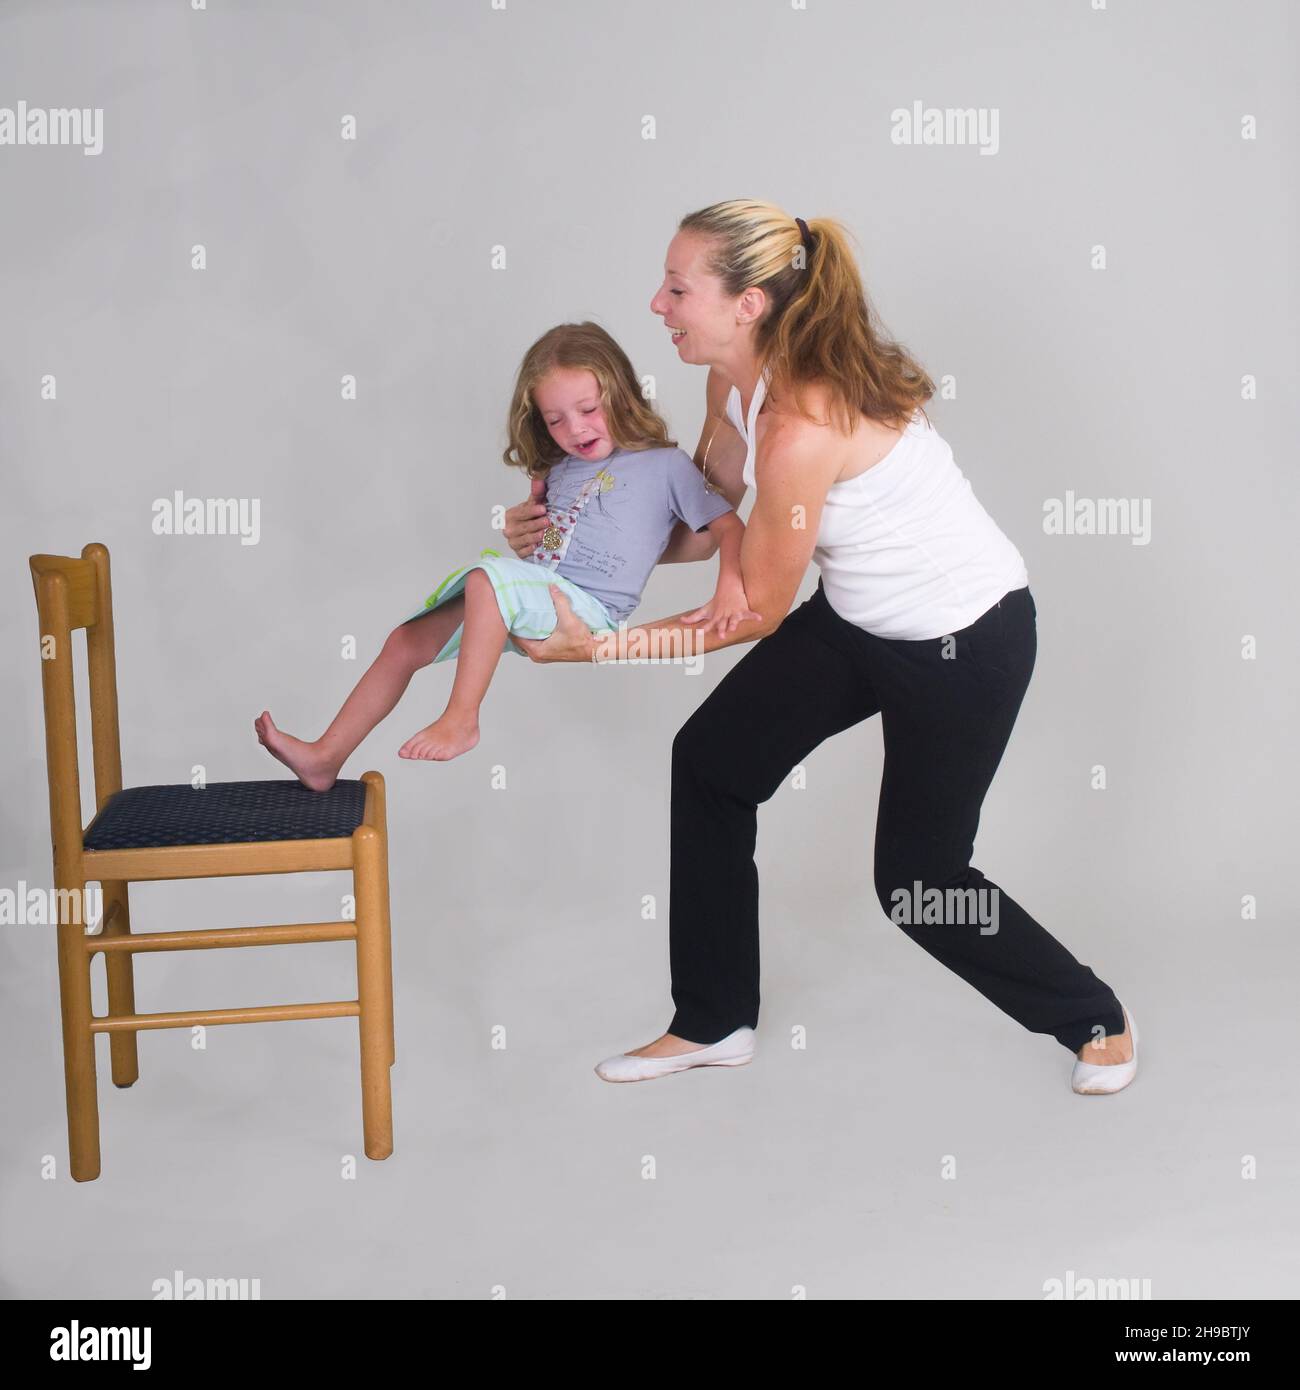 Mother catches daughter of 3 as she falls of a chair Stock Photo